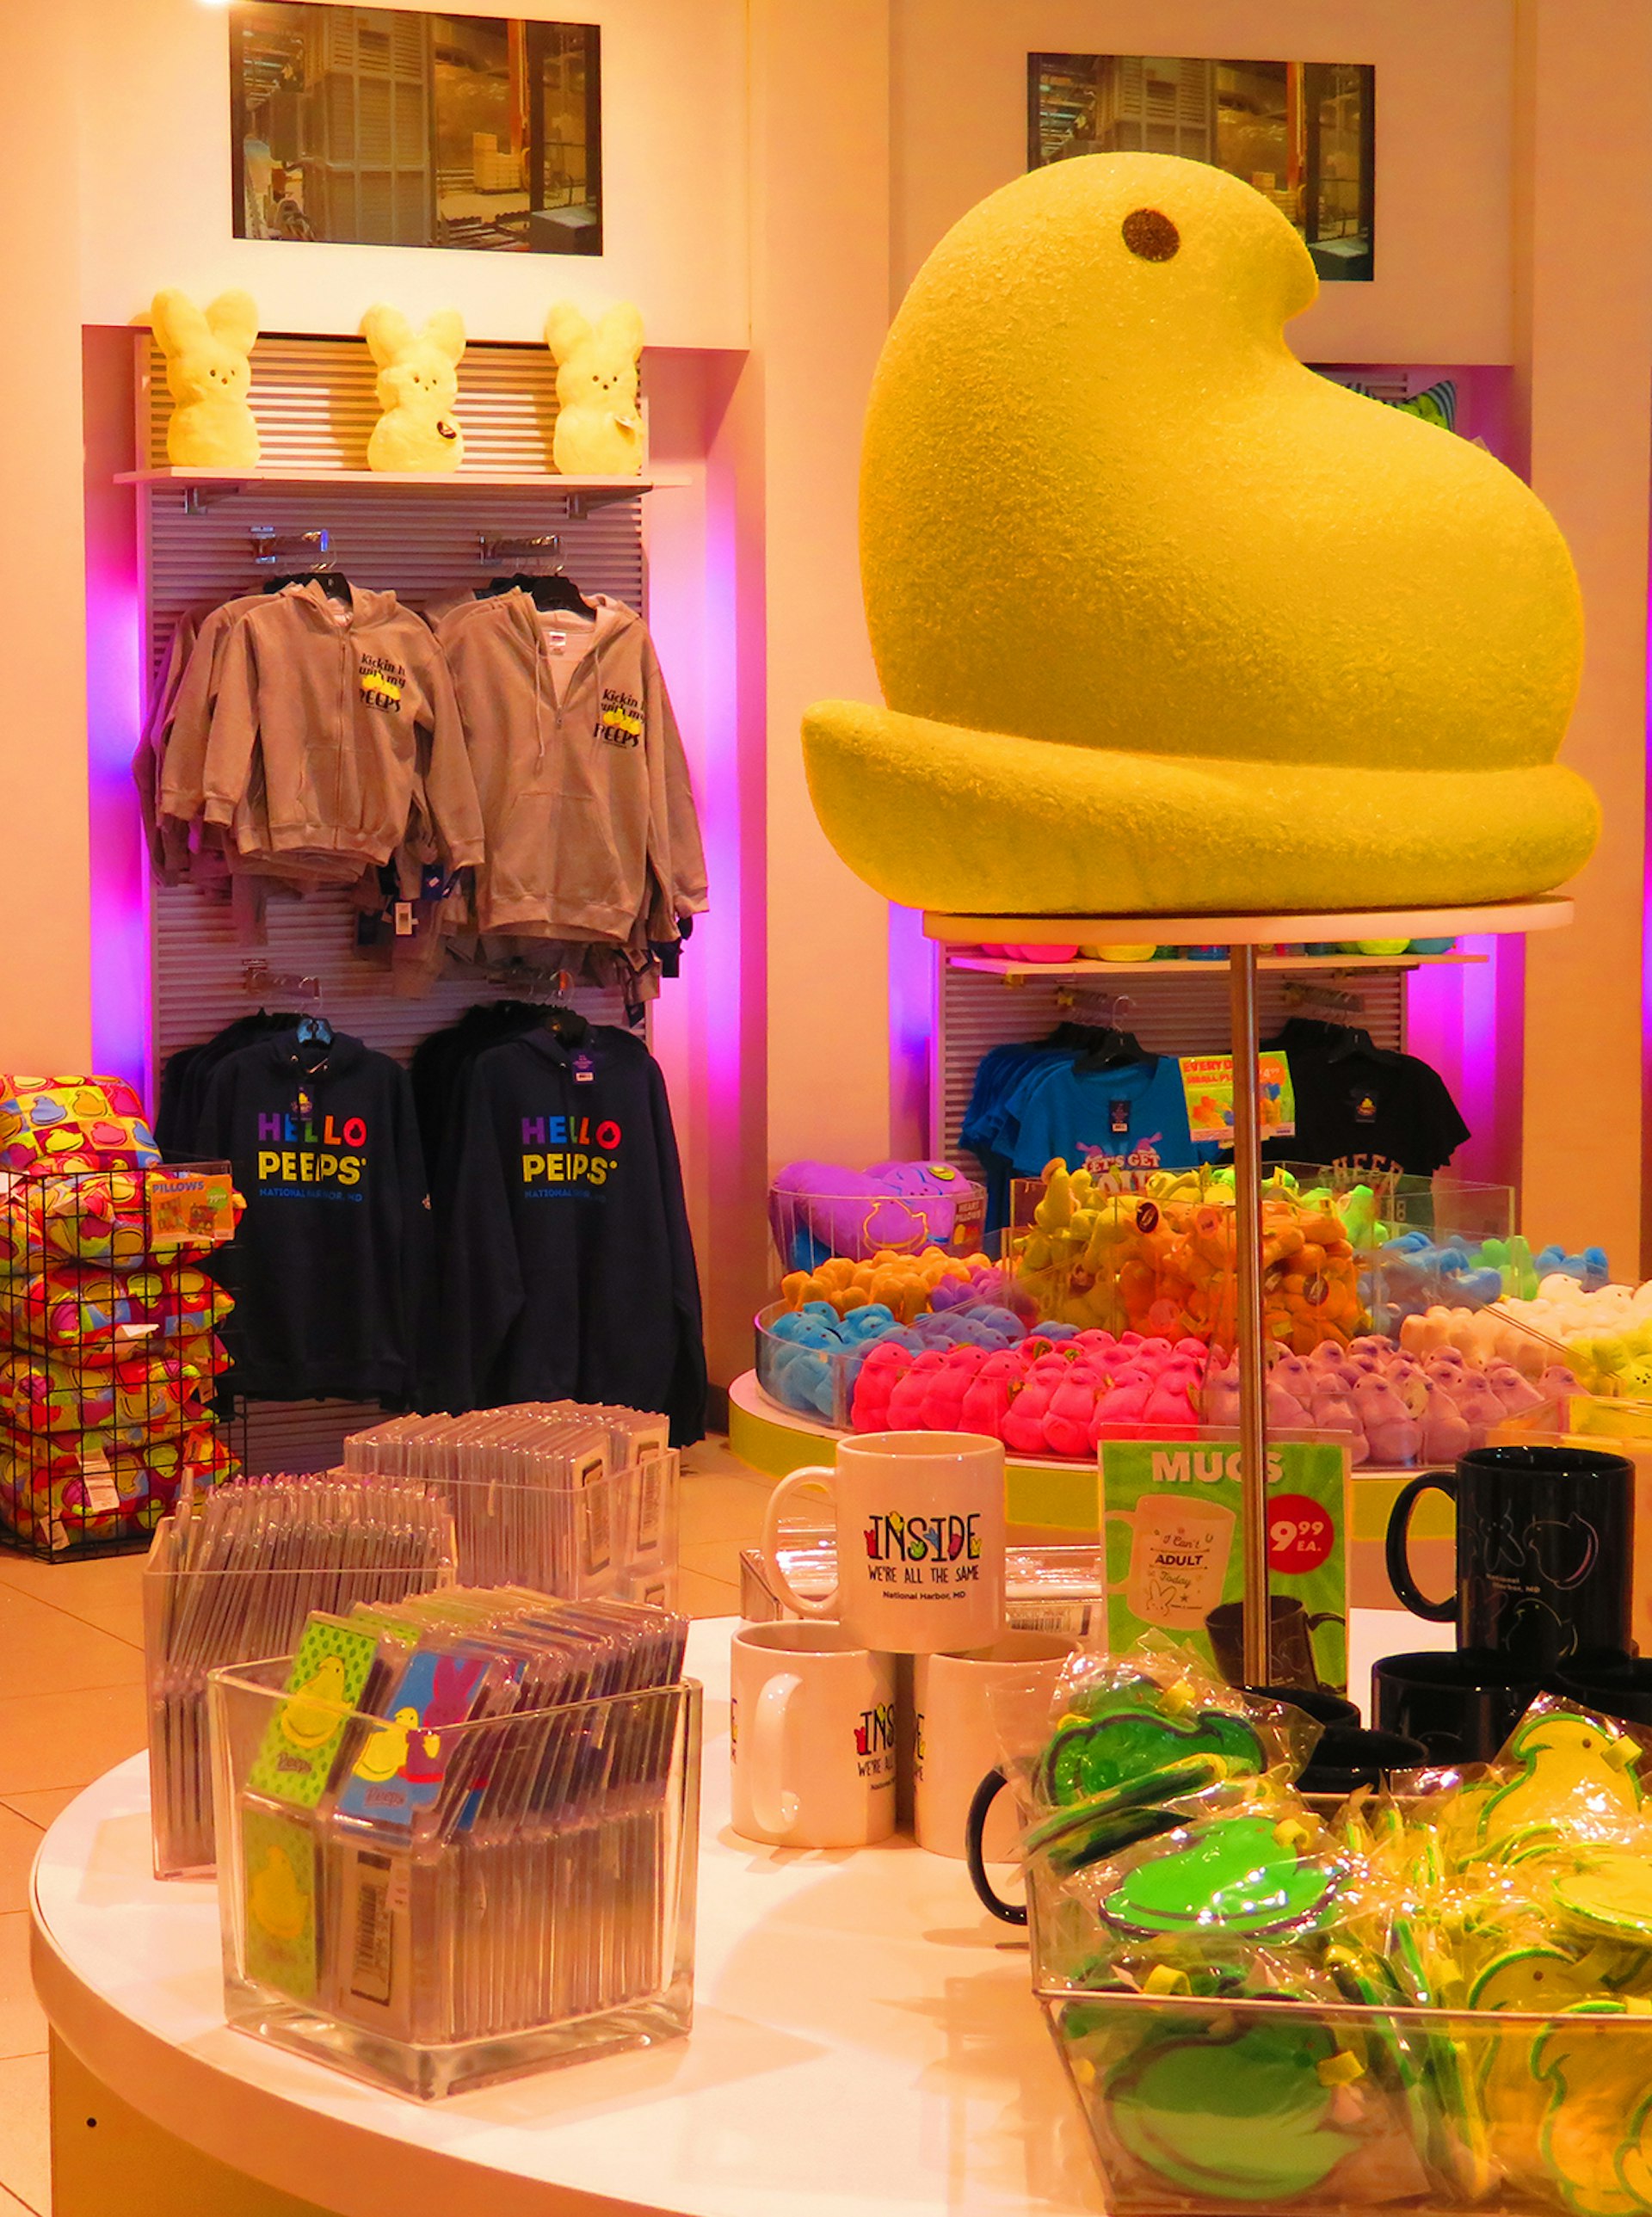 Large yellow Peep chick sits atop a display of mugs and other goods that feature the iconic marshmallow candies, in a store dedicated to Peeps merchandise